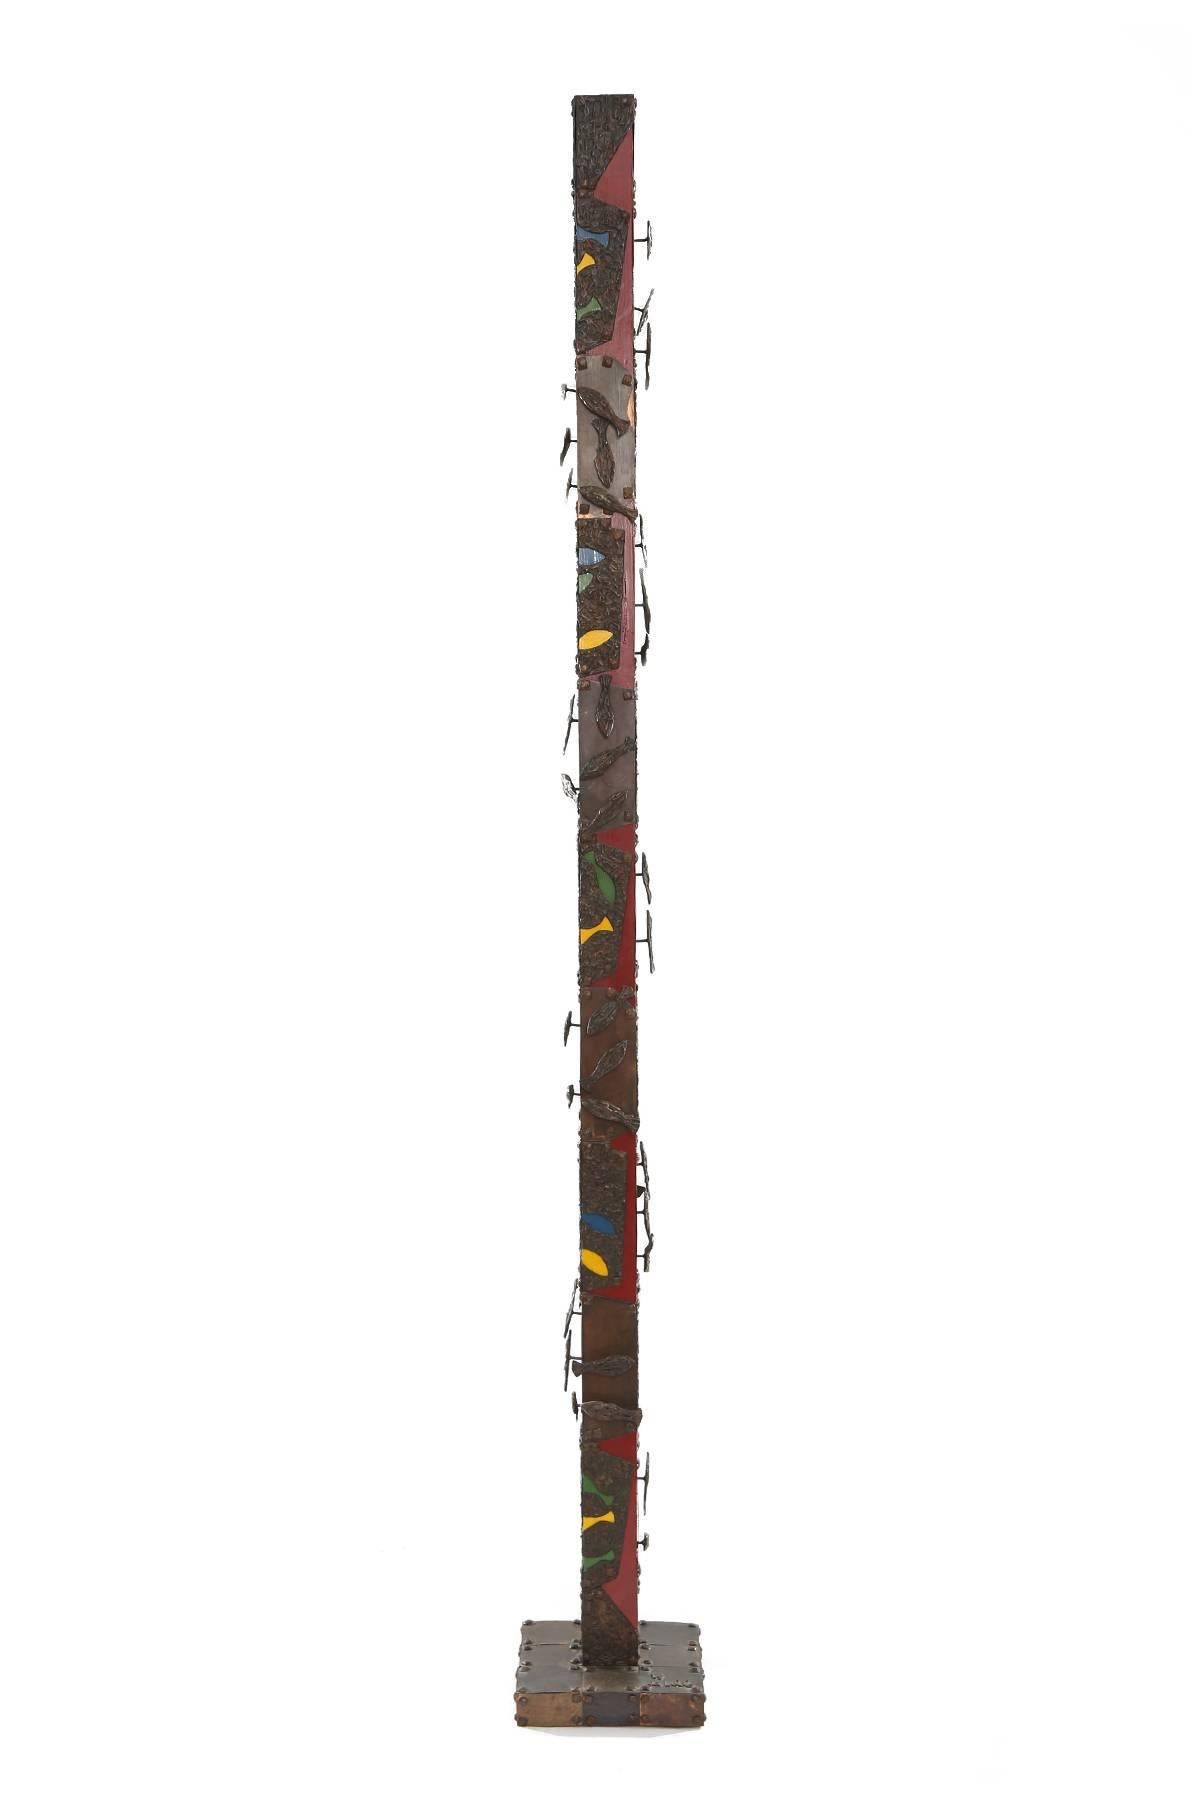 William de Lillo one off Brutalist metal TOTEM sculpture, circa early 1970s. The jeweler and artist, William De Lillo worked with Harry Winston, Cartier New York and most famously as Jean Schlumberger’s assistant at Tiffany & Co. Mr. de Lillo teamed